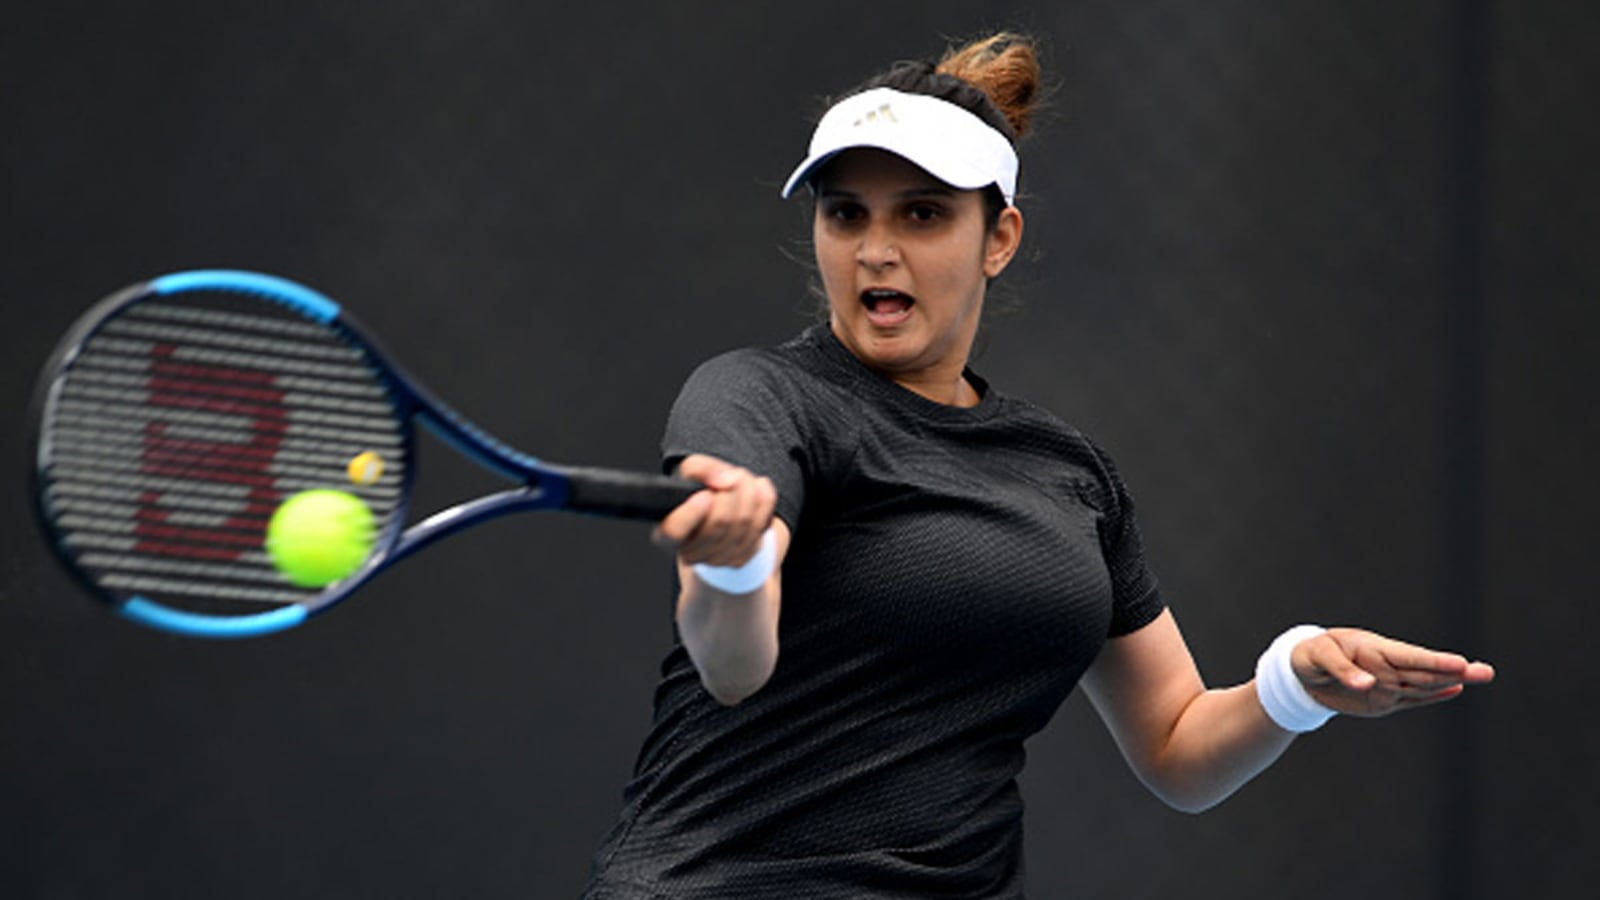 For Sania Mirza, belief to take on the best is what matters most ...